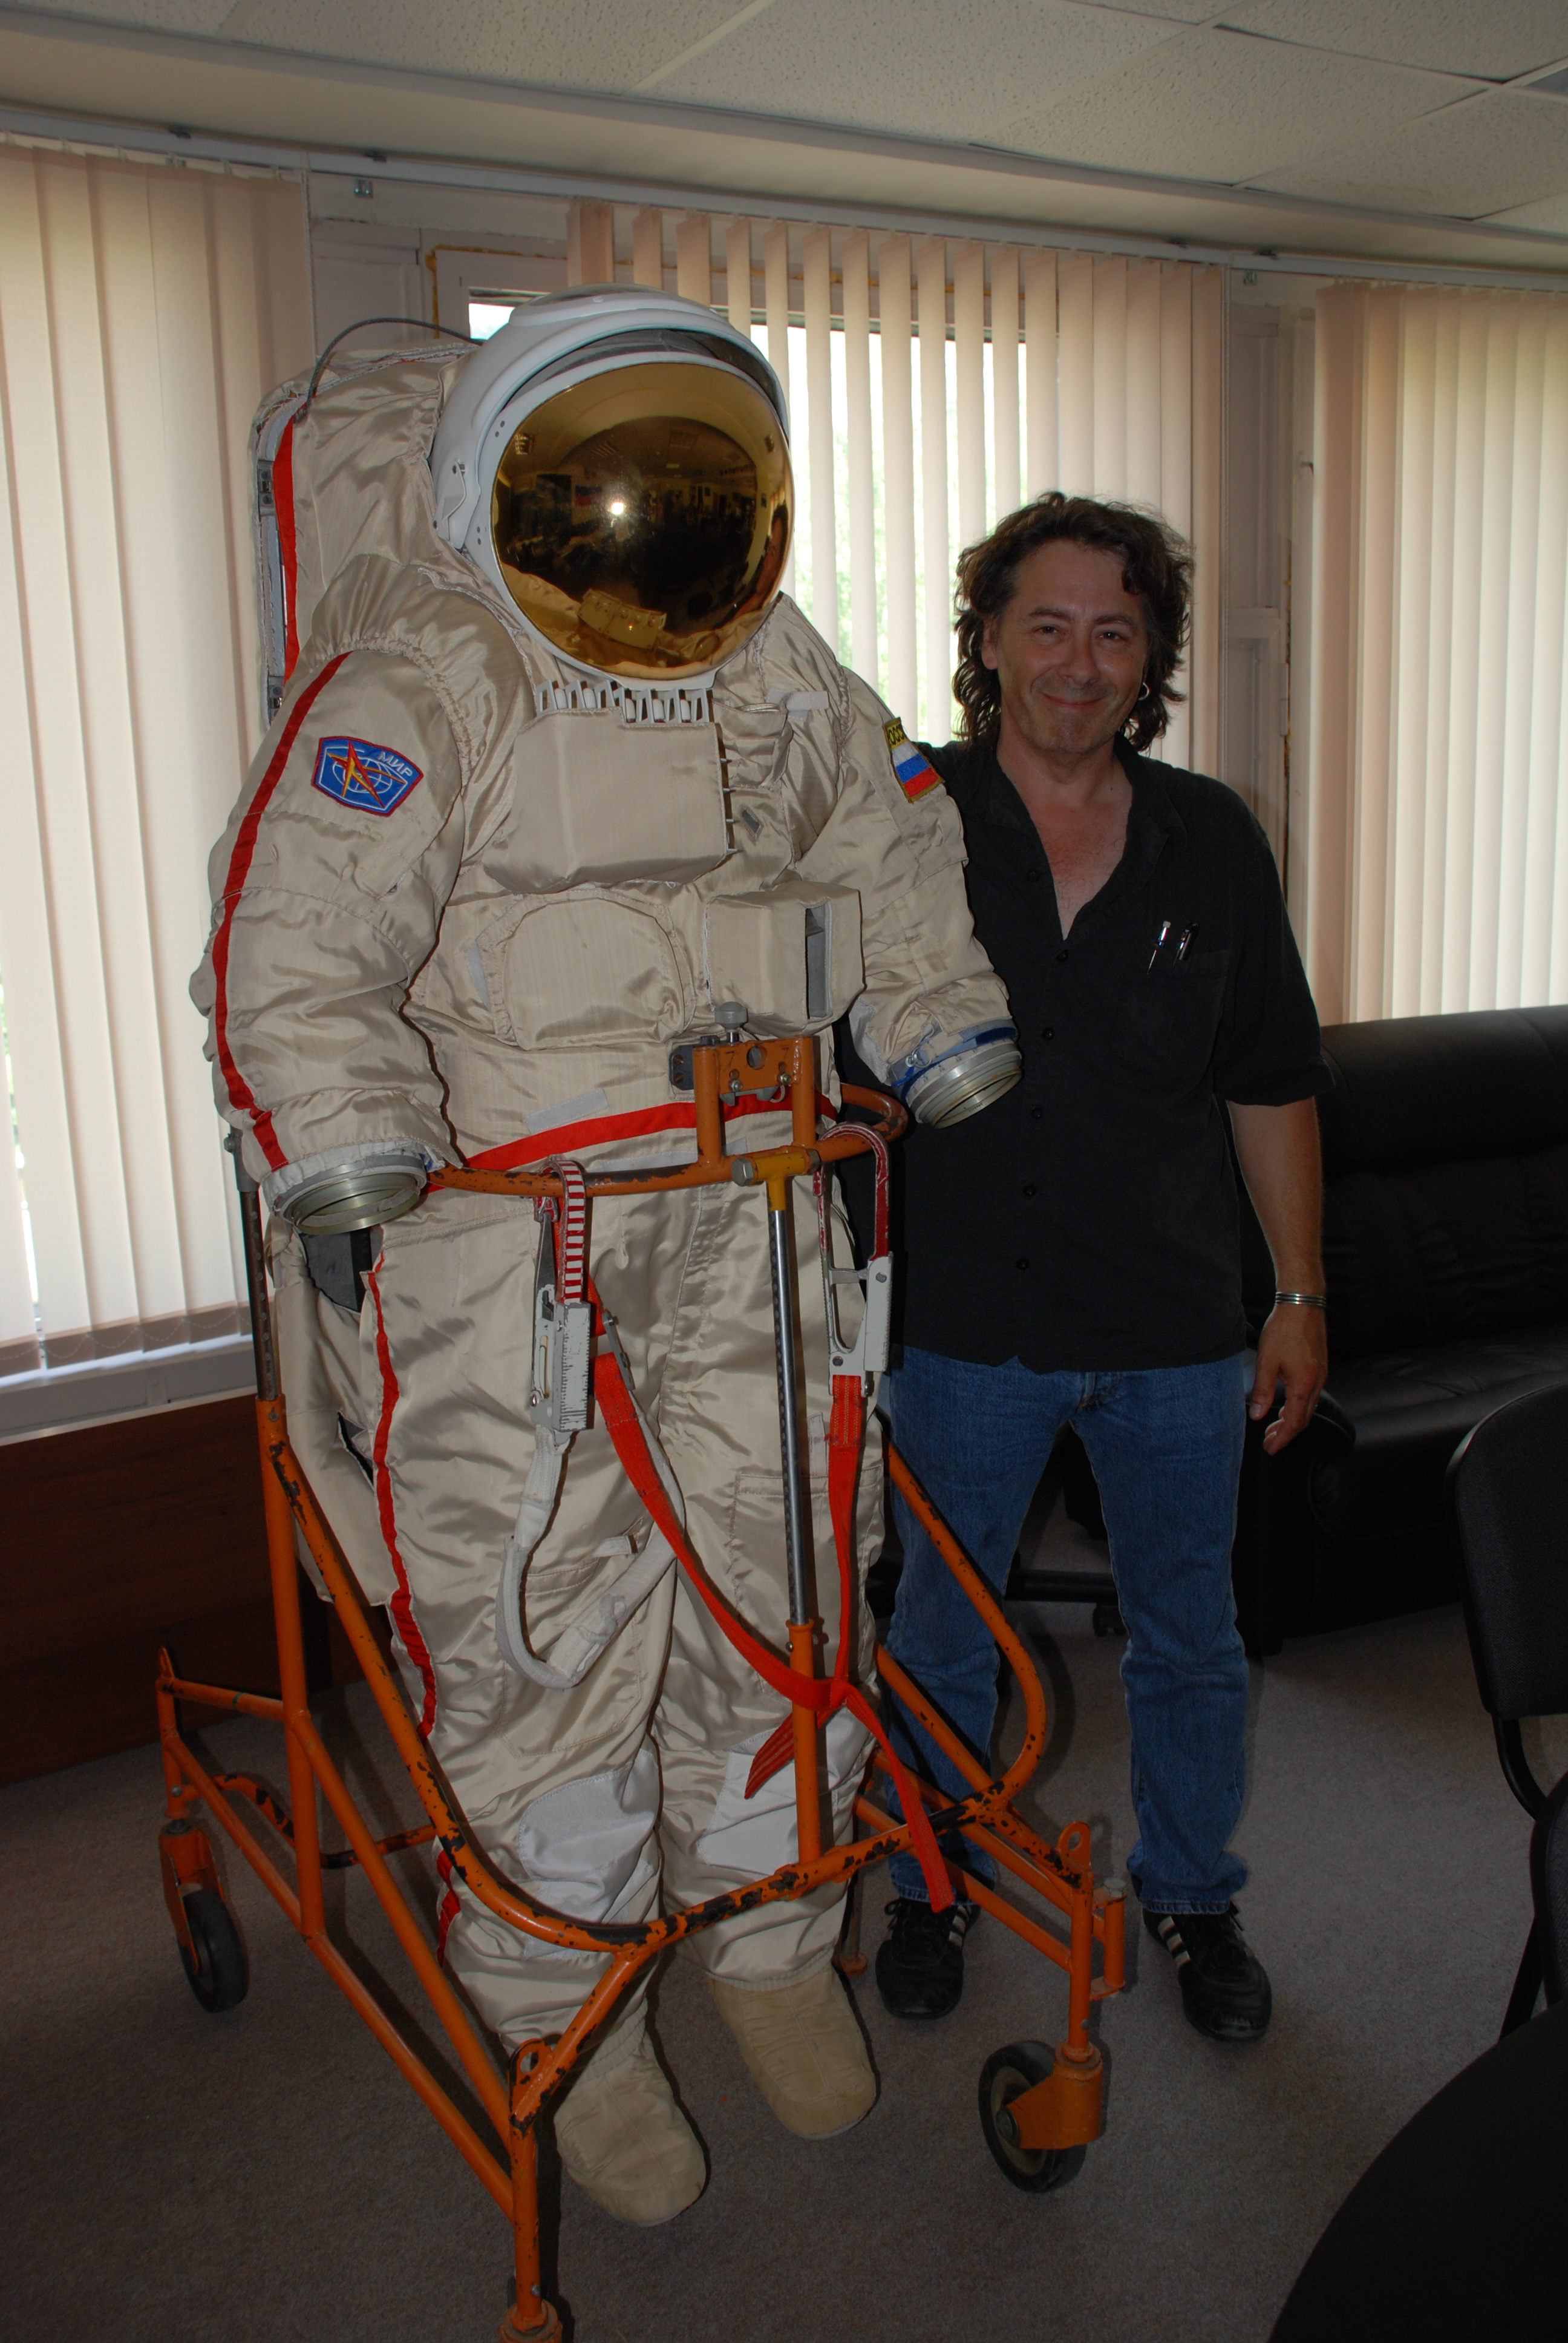 Russian Cosmonaut training center. Consultant for SONY Pictures International